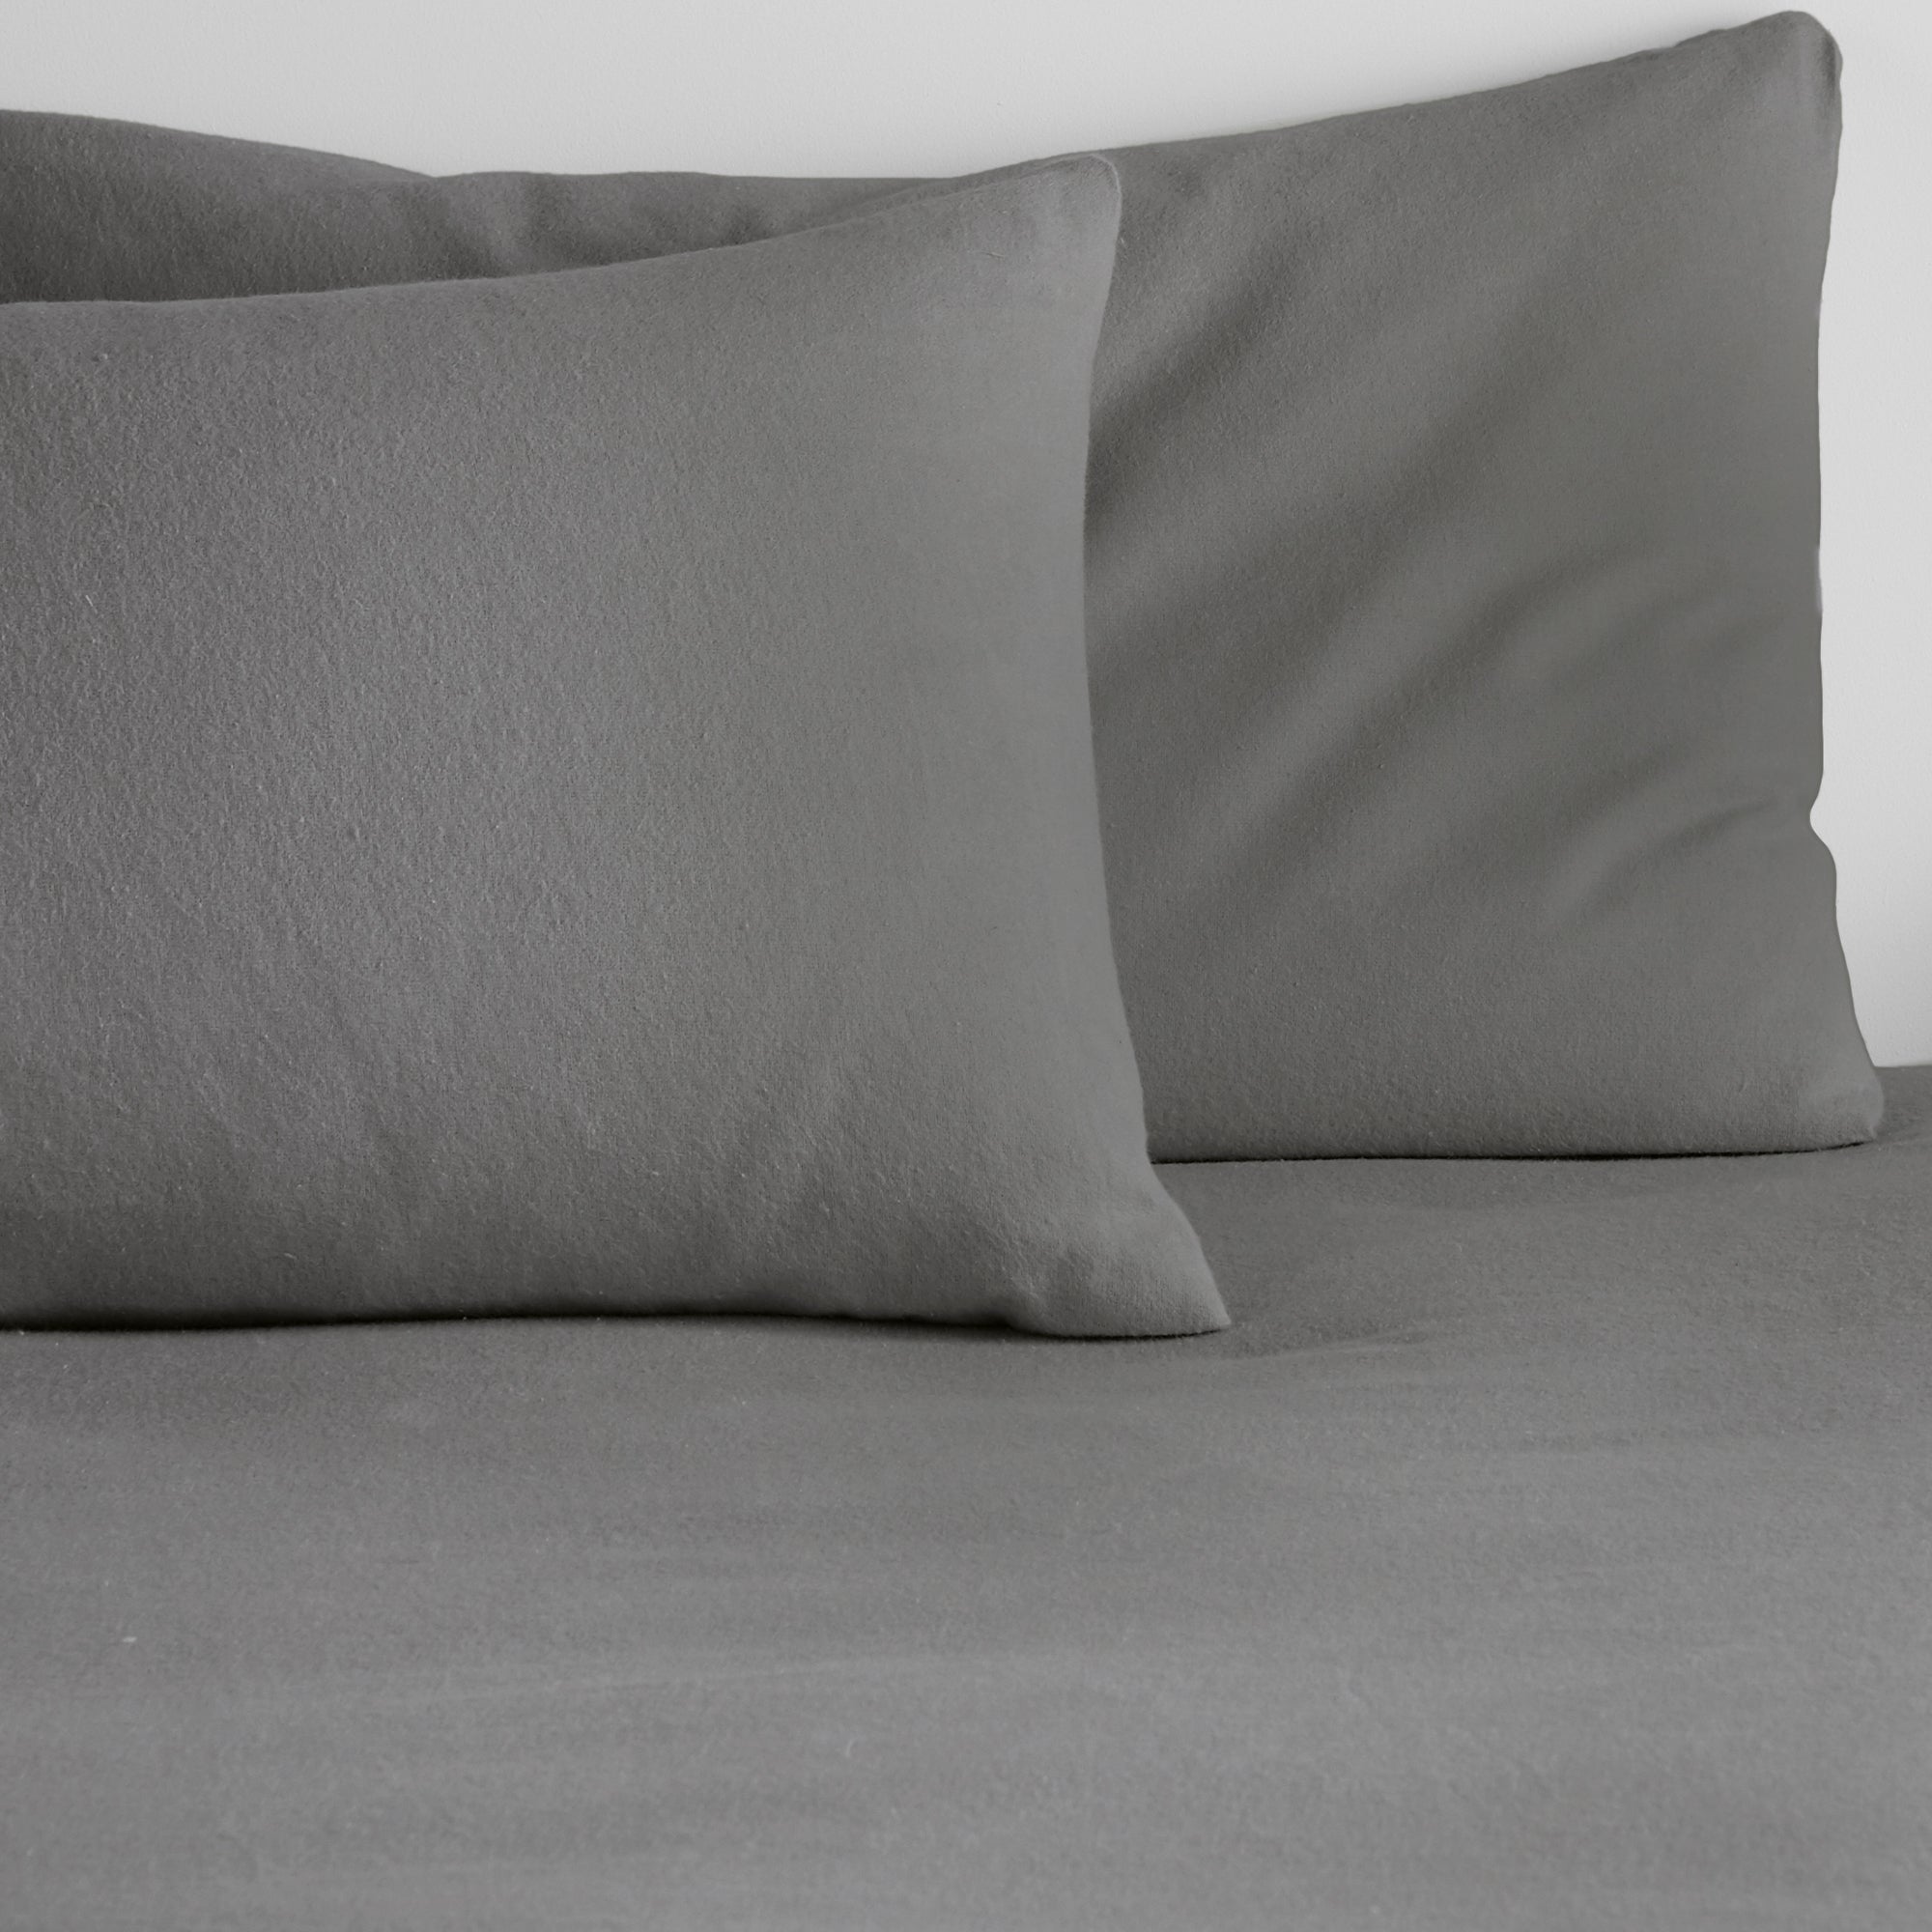 Brushed Bedding -  28cm Fitted Sheet and Optional Pillowcases -  in Charcoal by Fusion